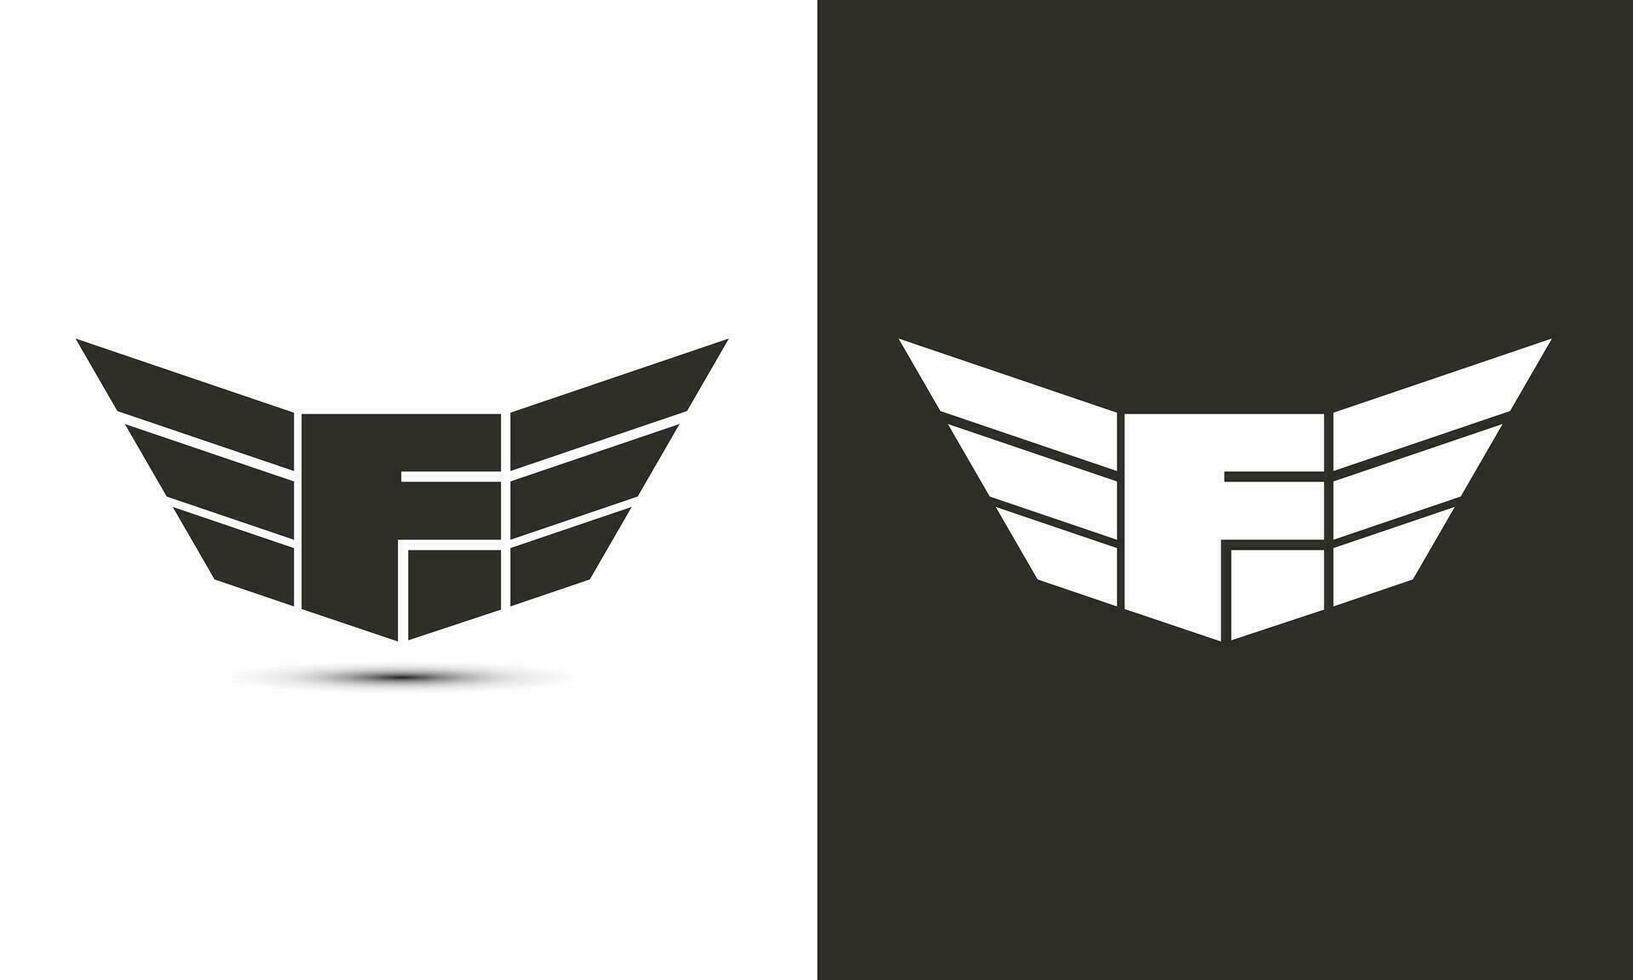 F logo in black and white color with wings and shield vector